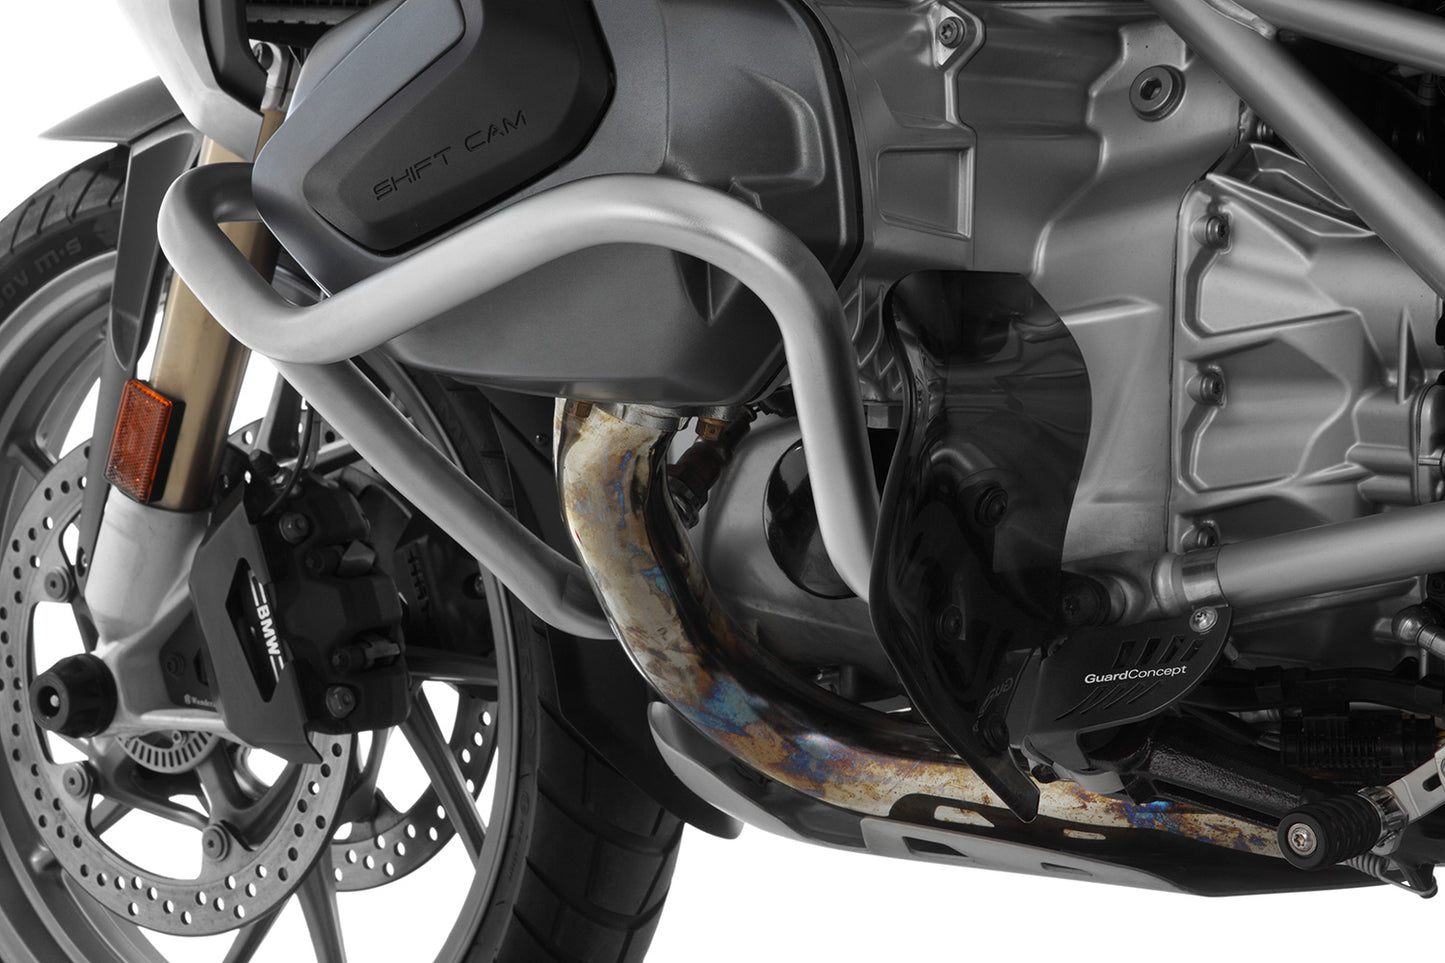 Wunderlich Engine protection bar R 1250 GS – stainless steel